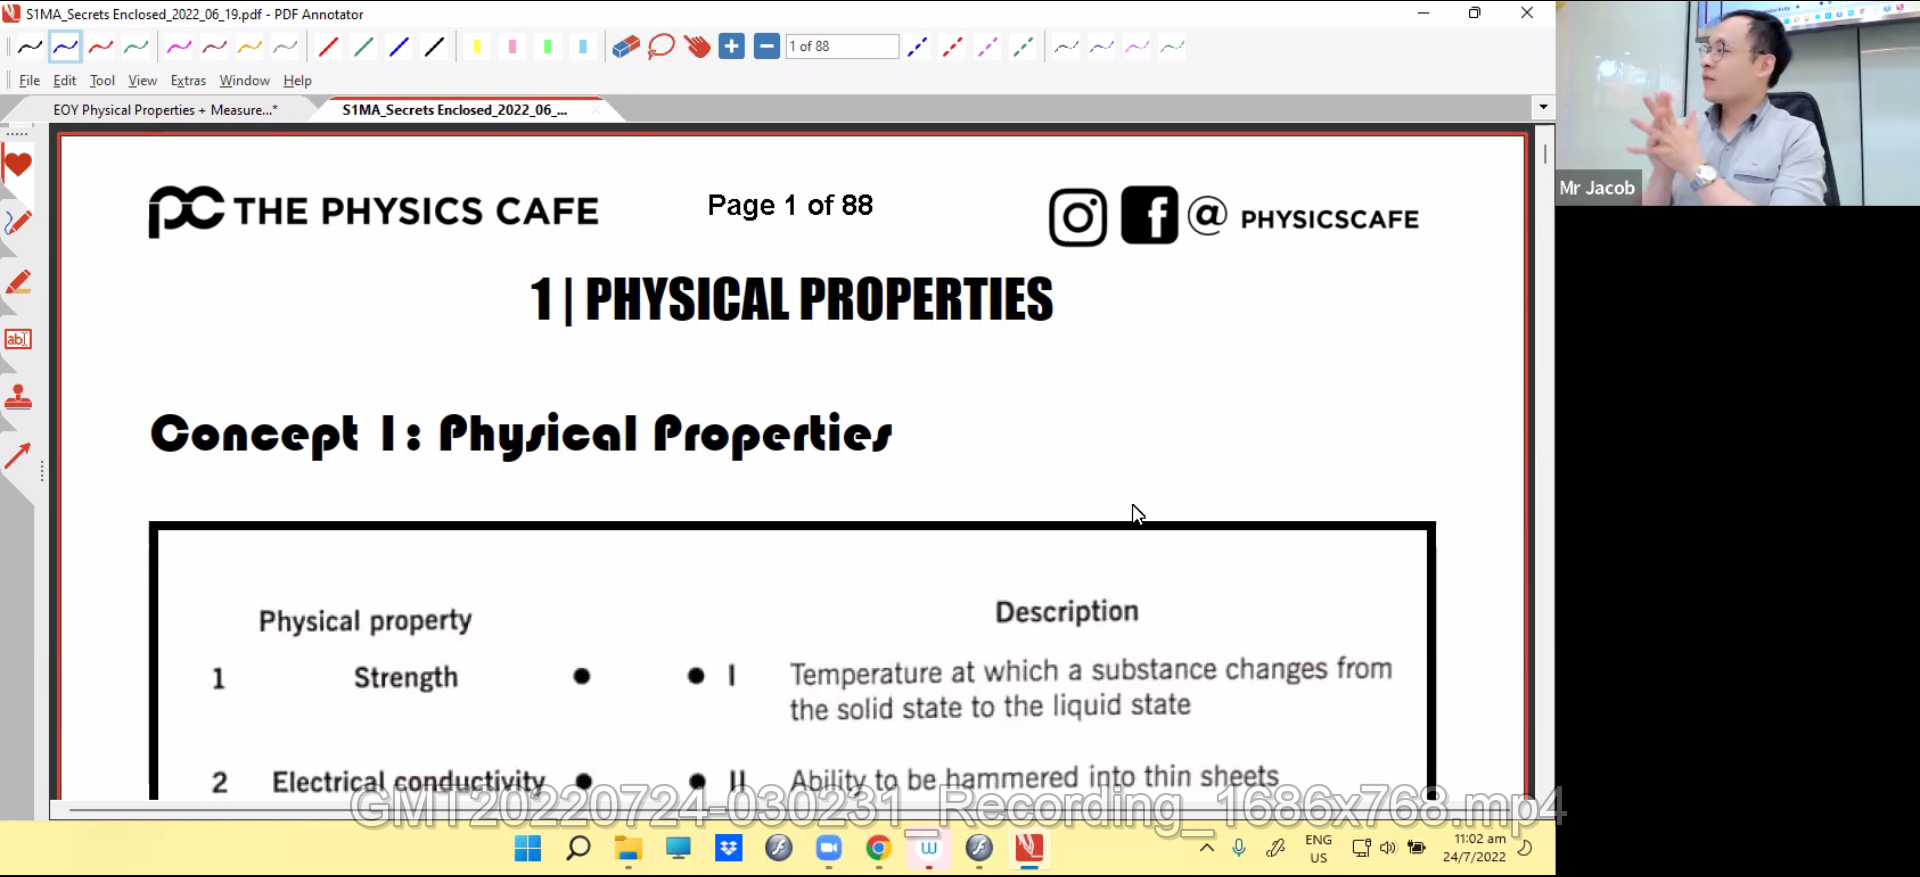 32. EOY Revision - SCI (Physical Properties/measurement) [2022] - JCT